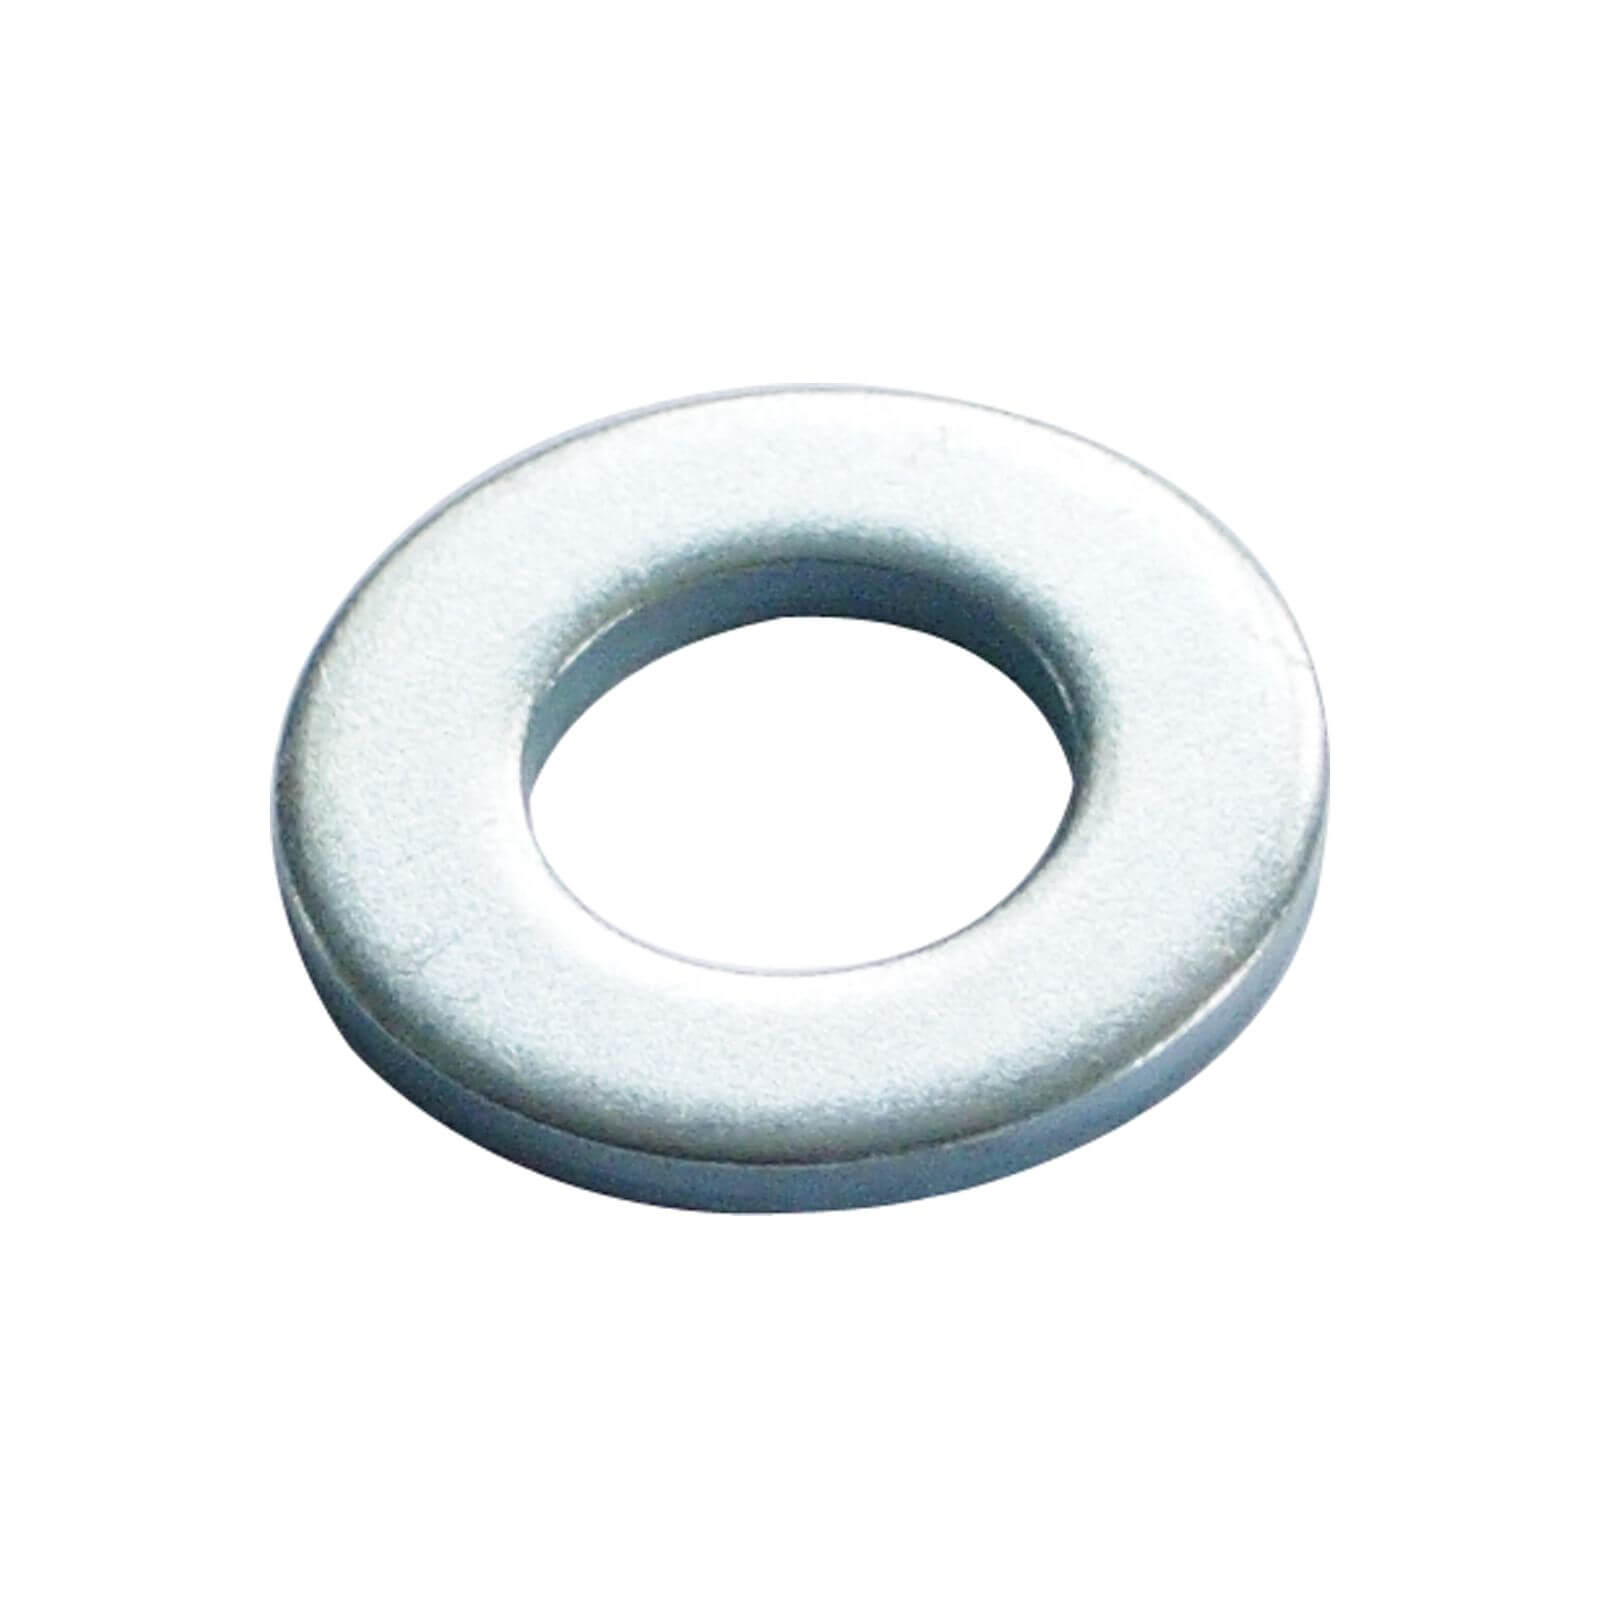 Washer - Bright Zinc Plated - M4 - 50 Pack